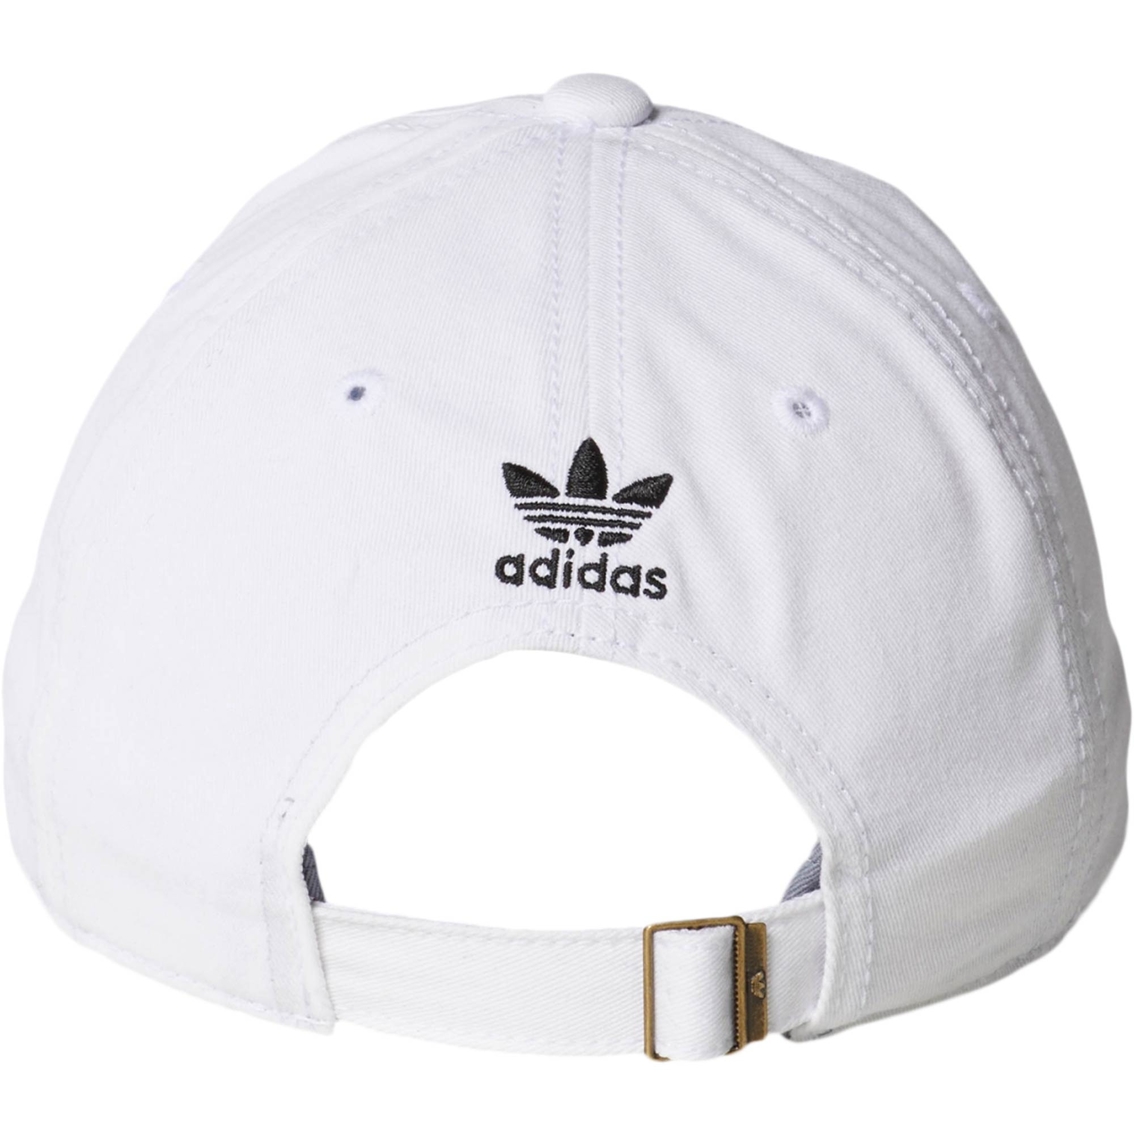 Adidas Originals Relaxed Strap Back Hat - Image 4 of 7